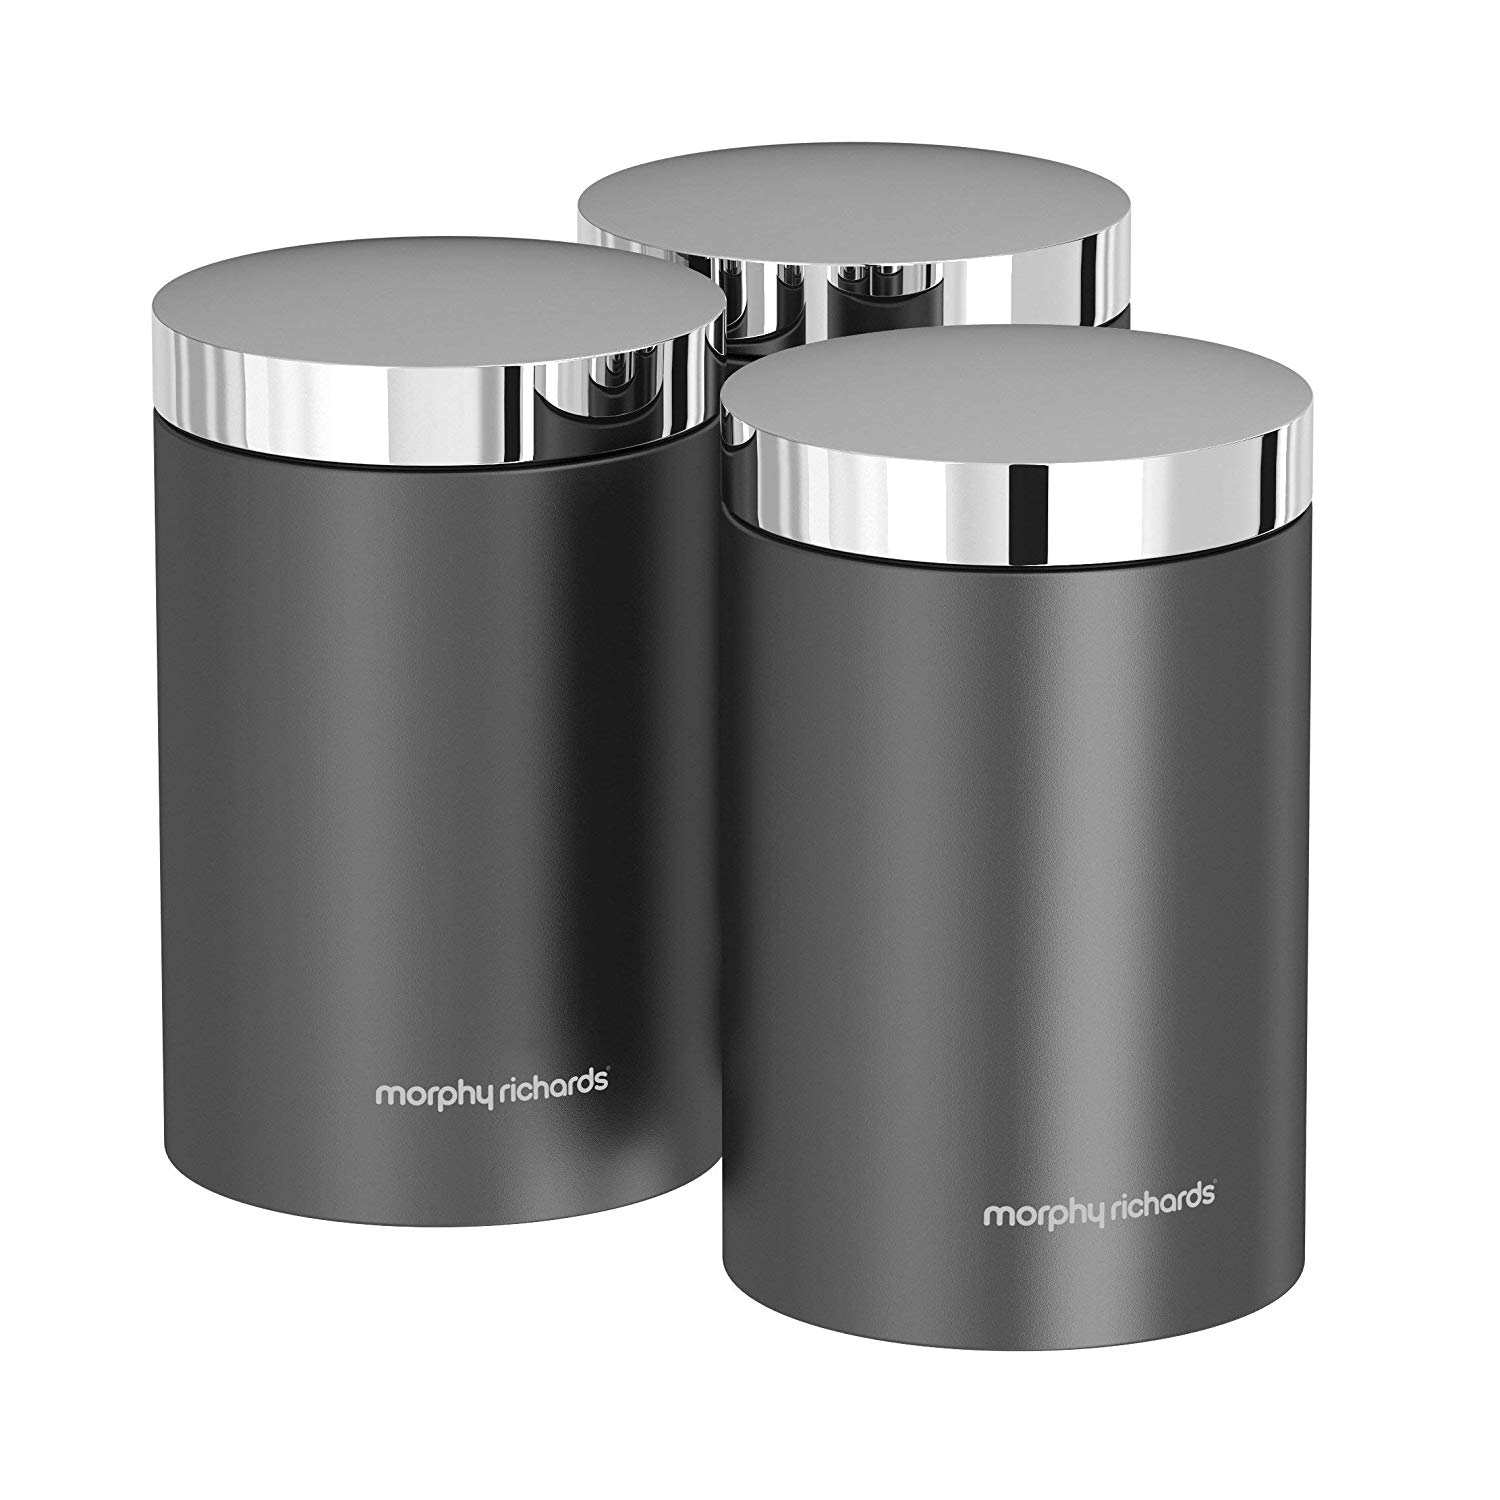 Morphy Richards Canisters - Titanium - Kettle and Toaster Man